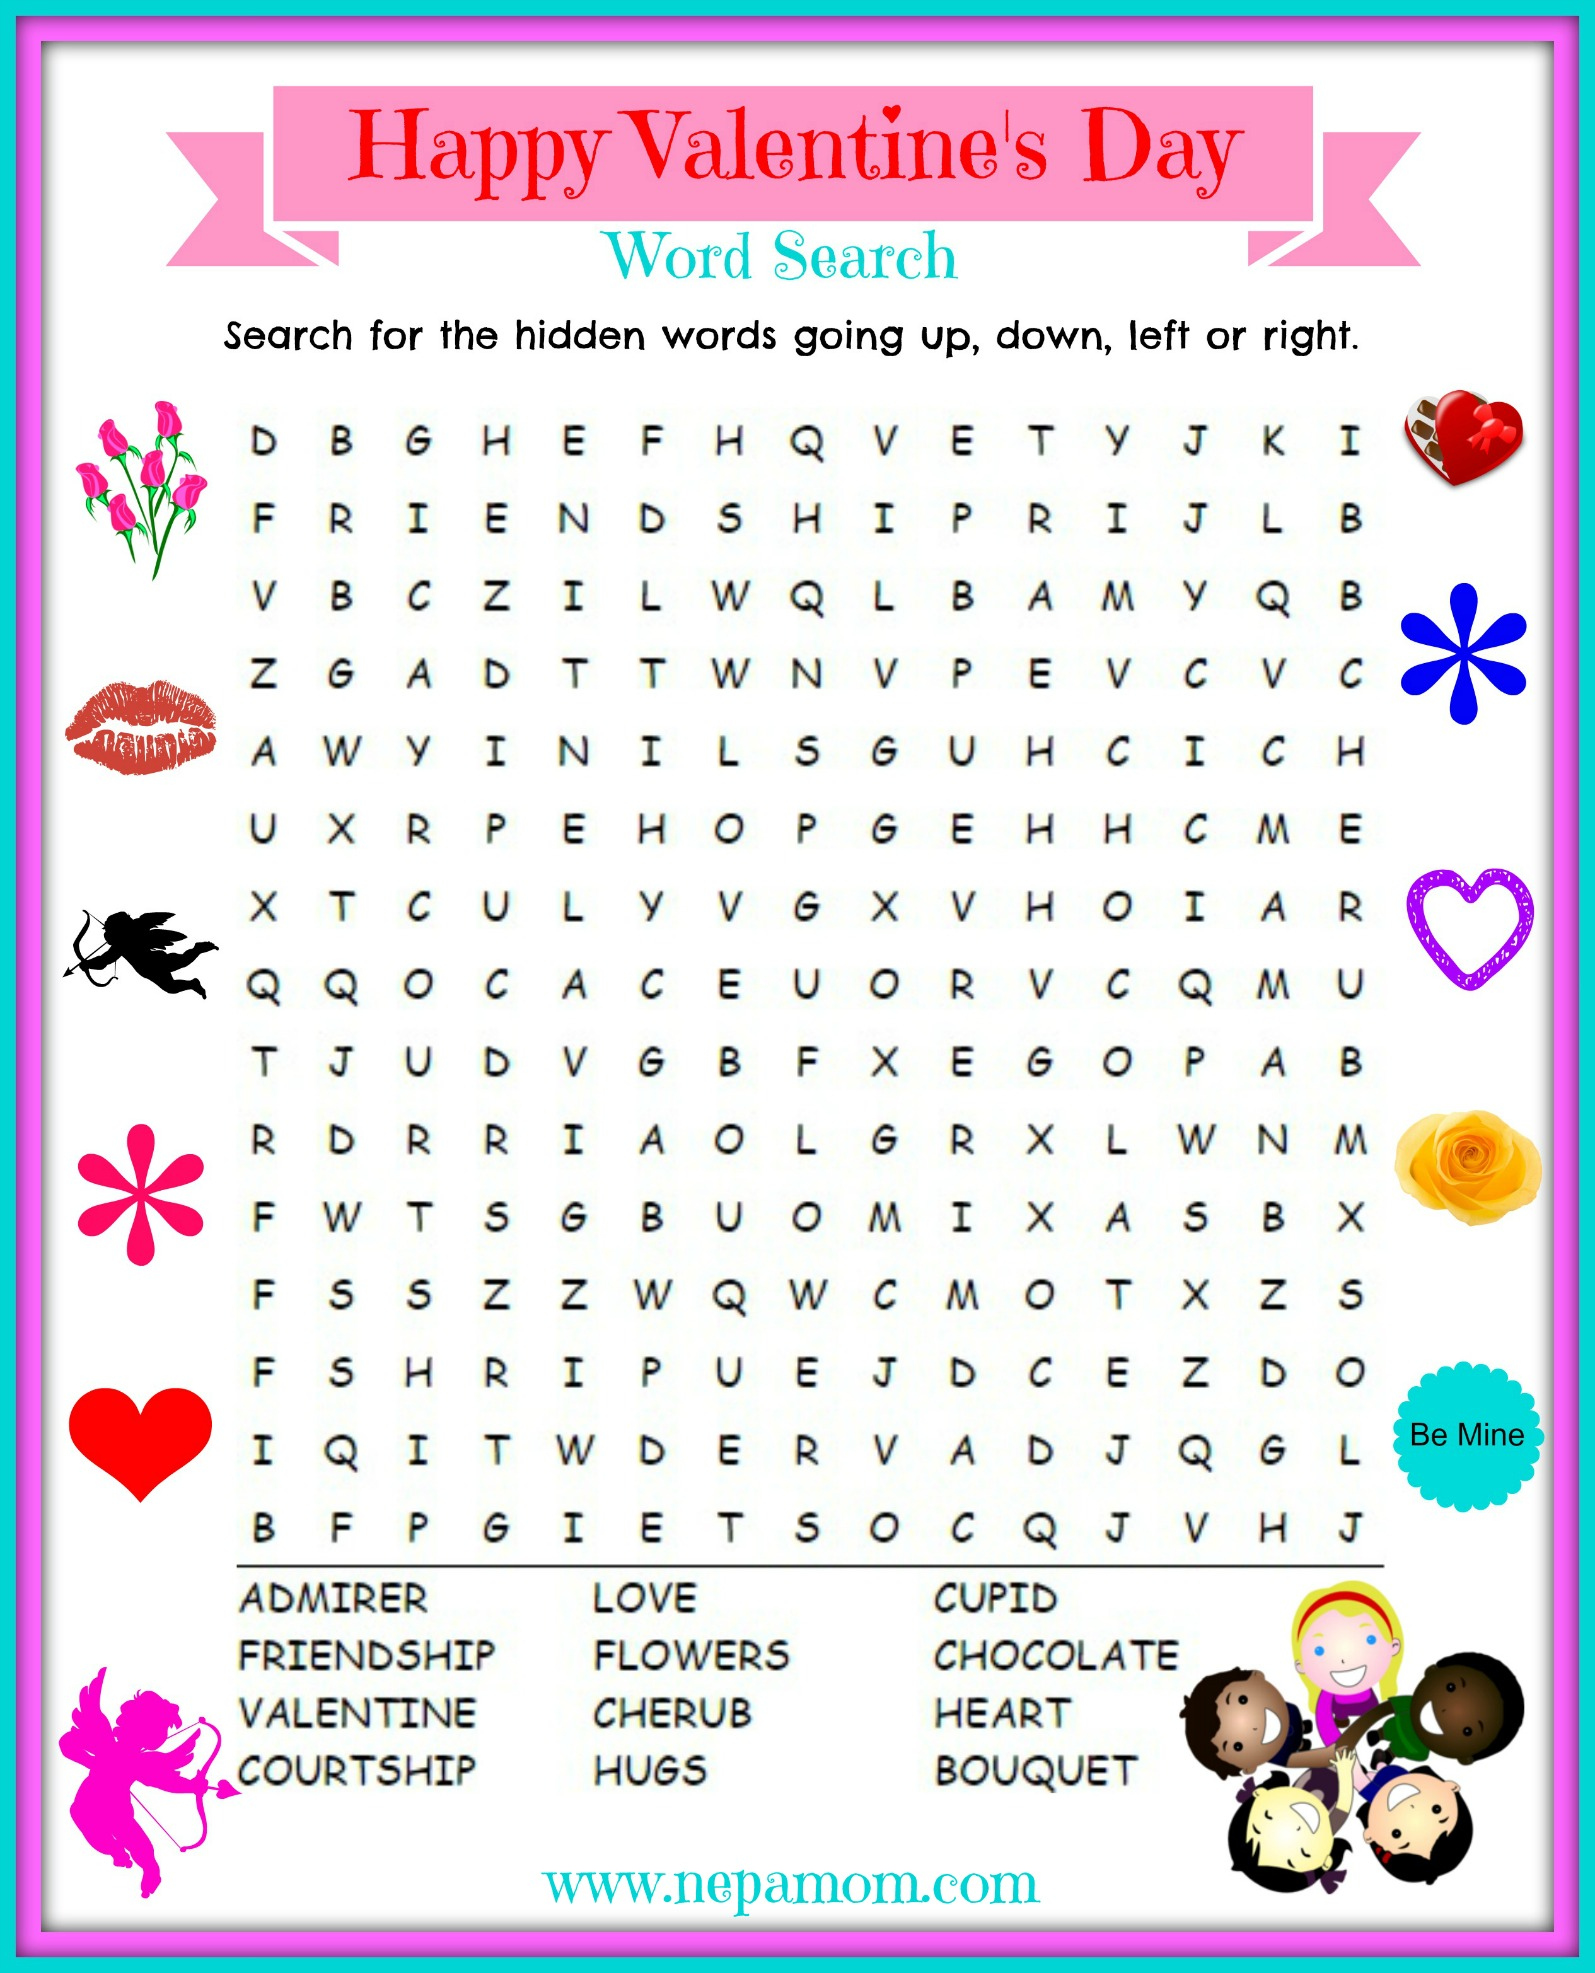 Valentine 39 s Day Word Search Puzzle NEPA Mom